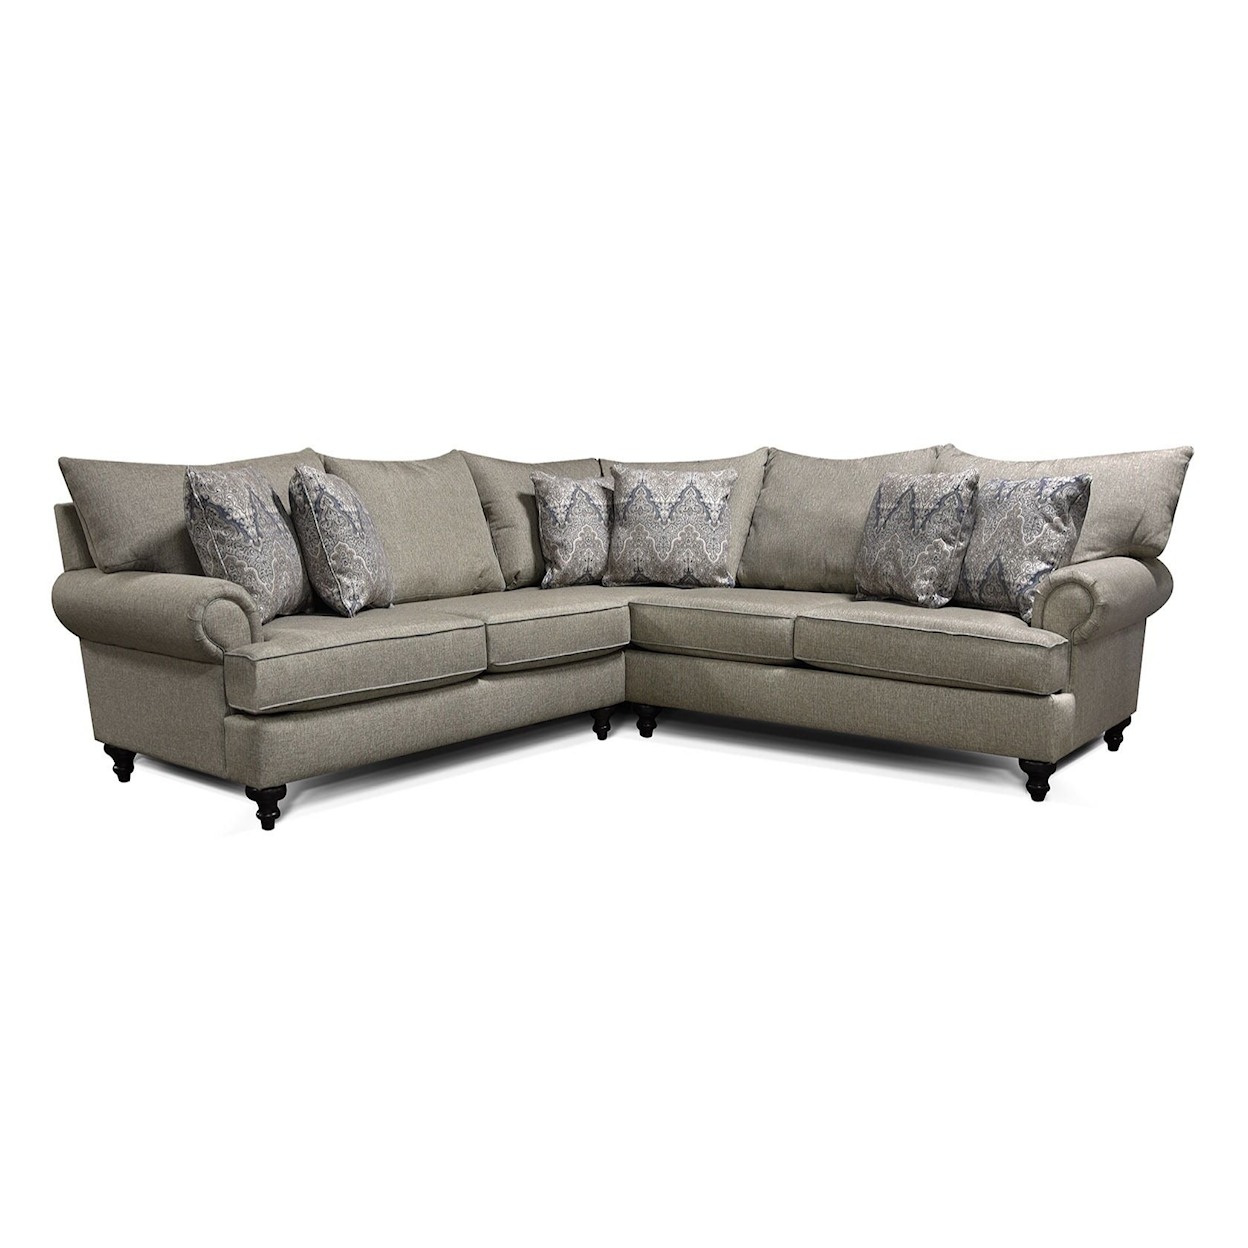 Dimensions 4Y00/N Series 2-Piece Sectional Sofa